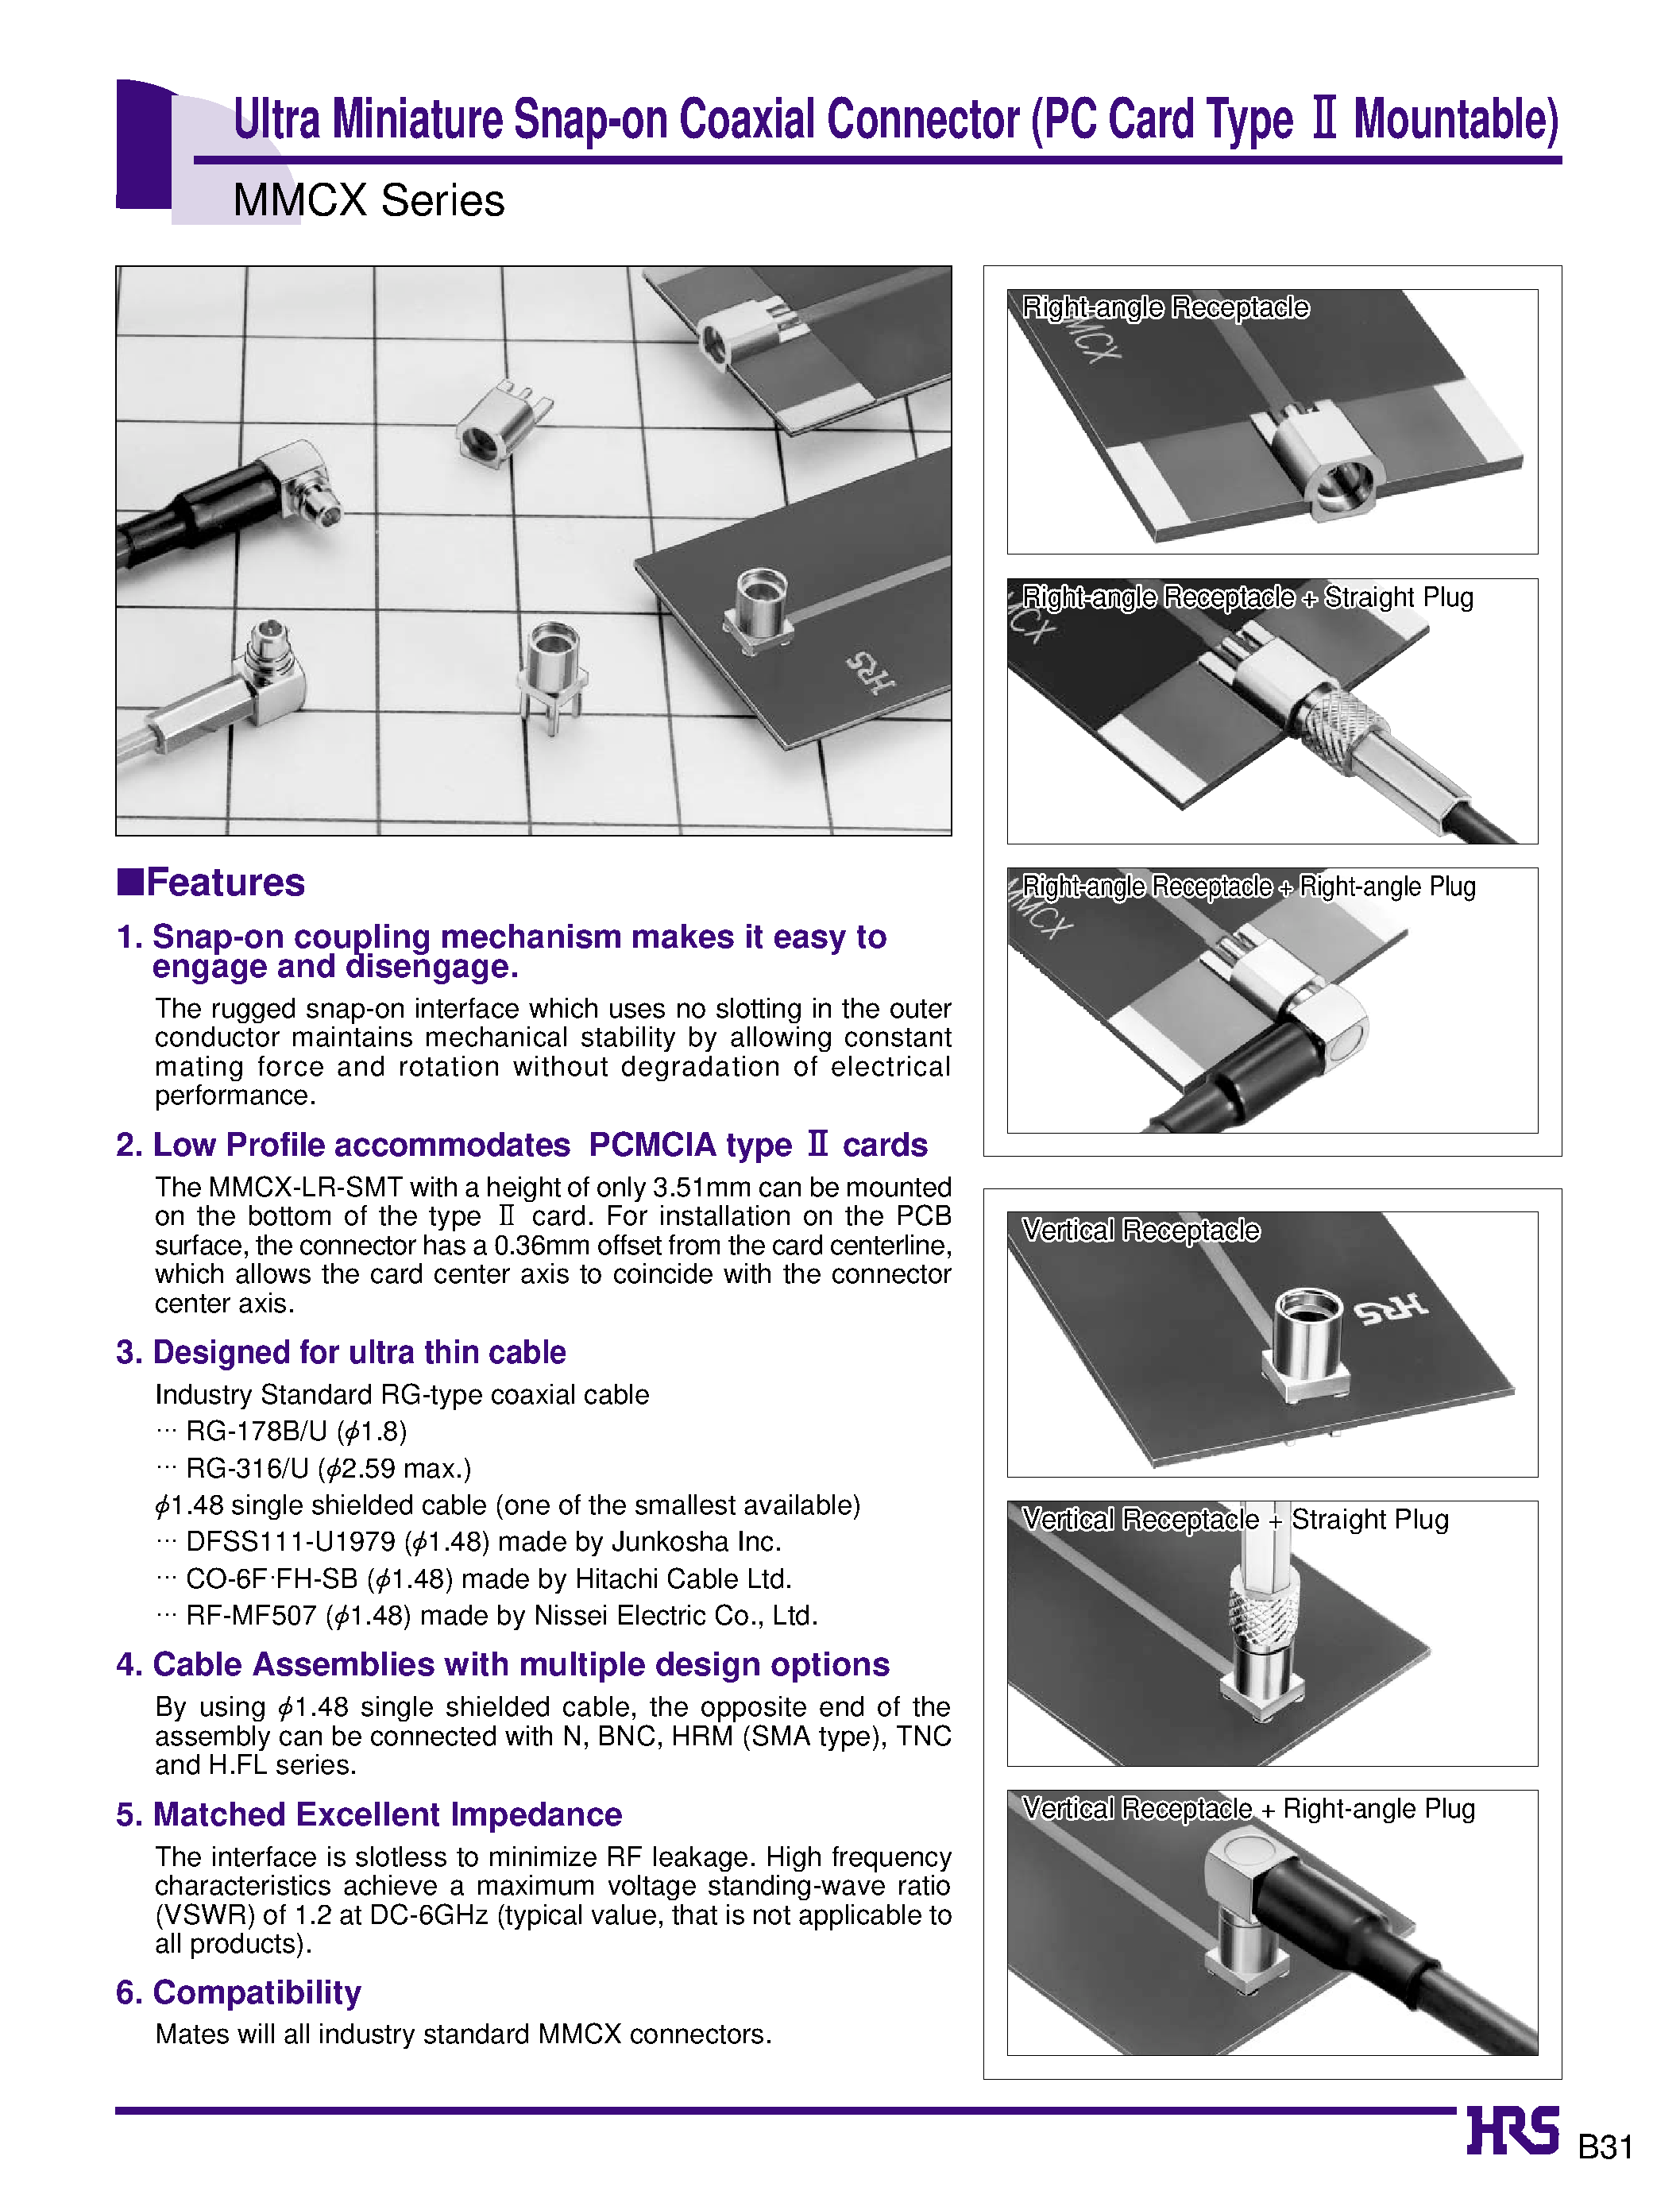 Datasheet MMCX-J-PC - Ultra Miniature Snap-on Coaxial Connector (PC Card Type 2 Mountable) page 1